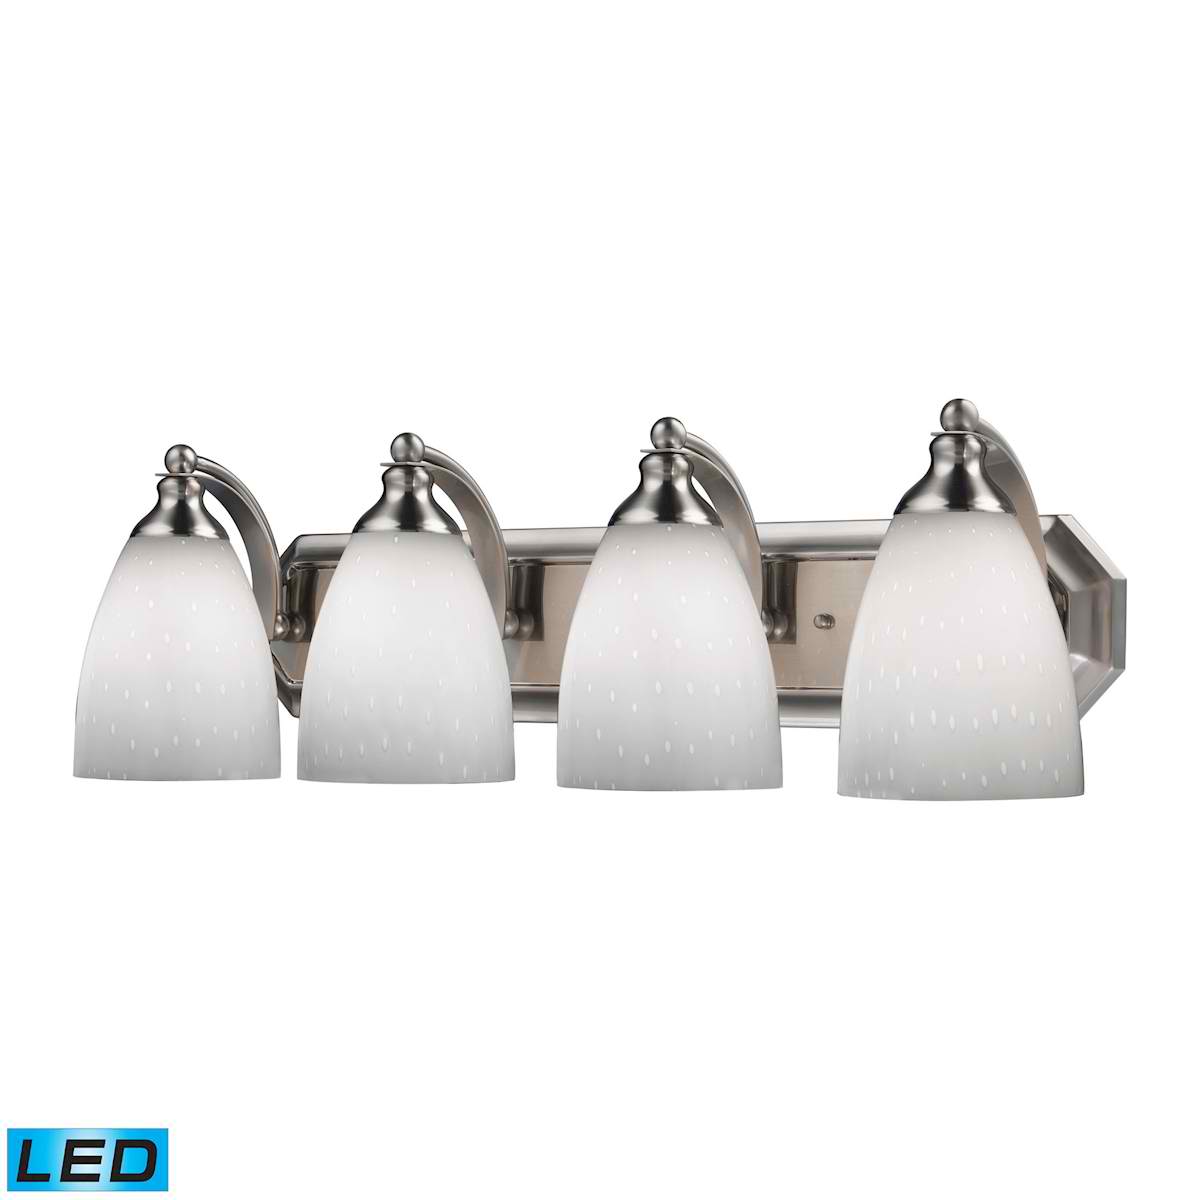 4 Light Vanity in Satin Nickel and Simply White Glass - LED, 800 Lumens (3200 Lumens Total) with Full Scale